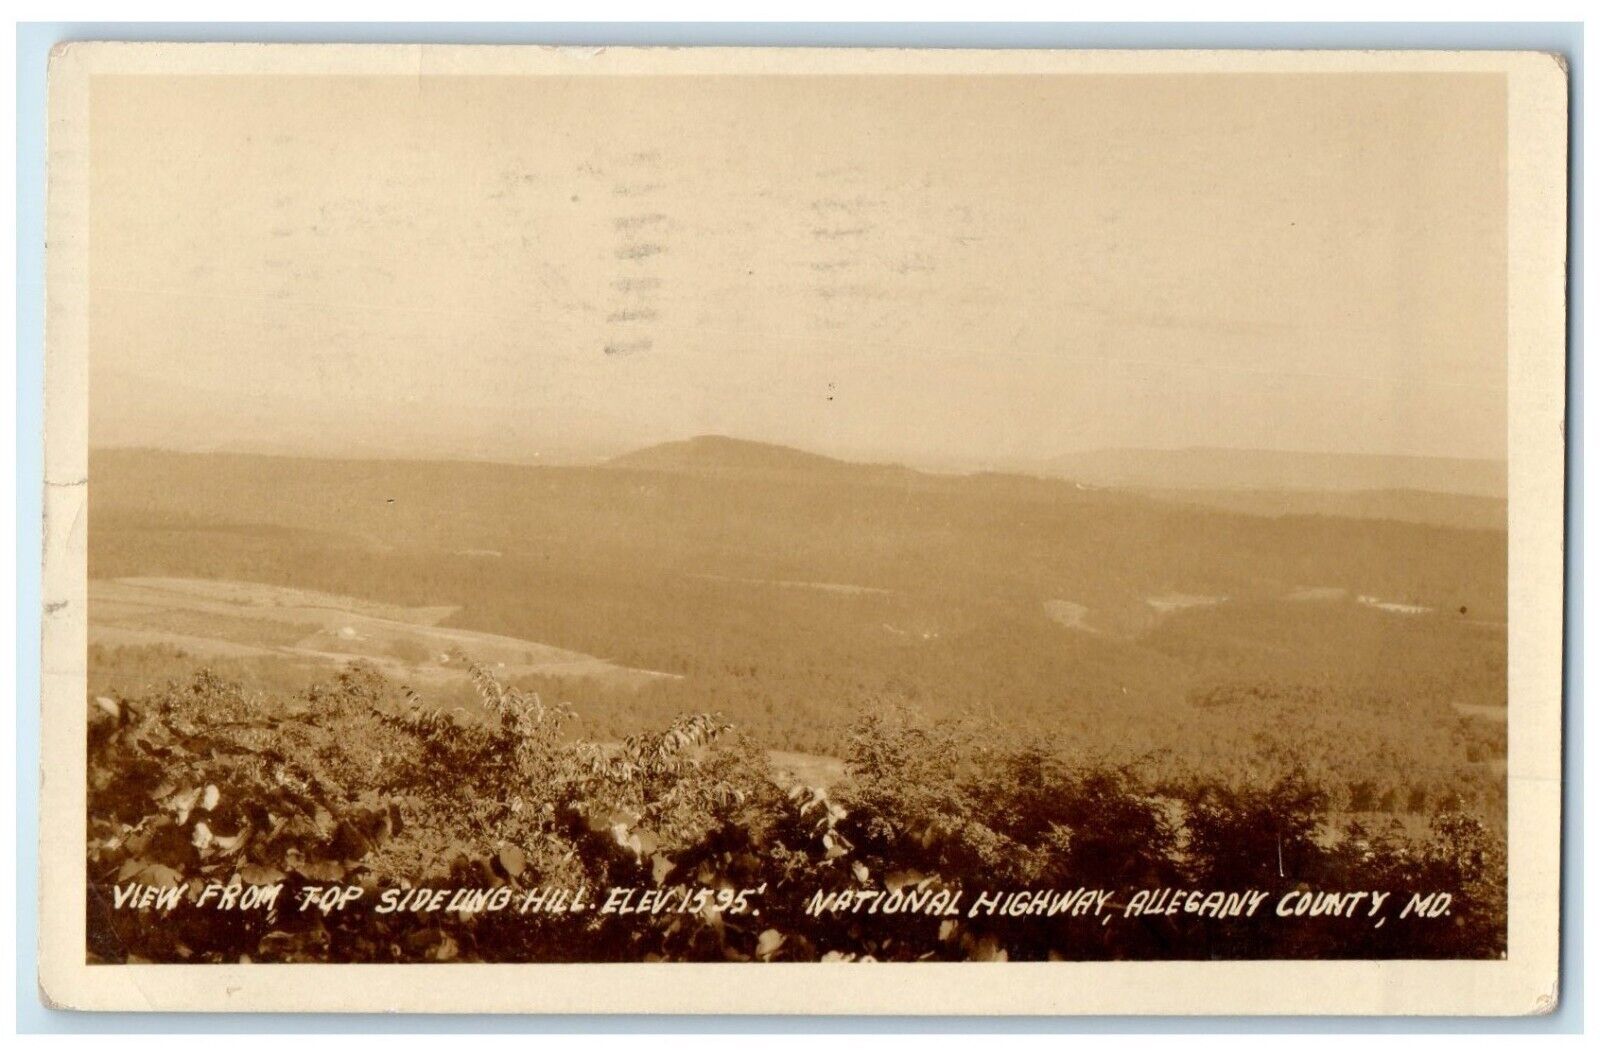 1942 View From Top Sideling Hill Alleghany County Maryland RPPC Photo Postcard